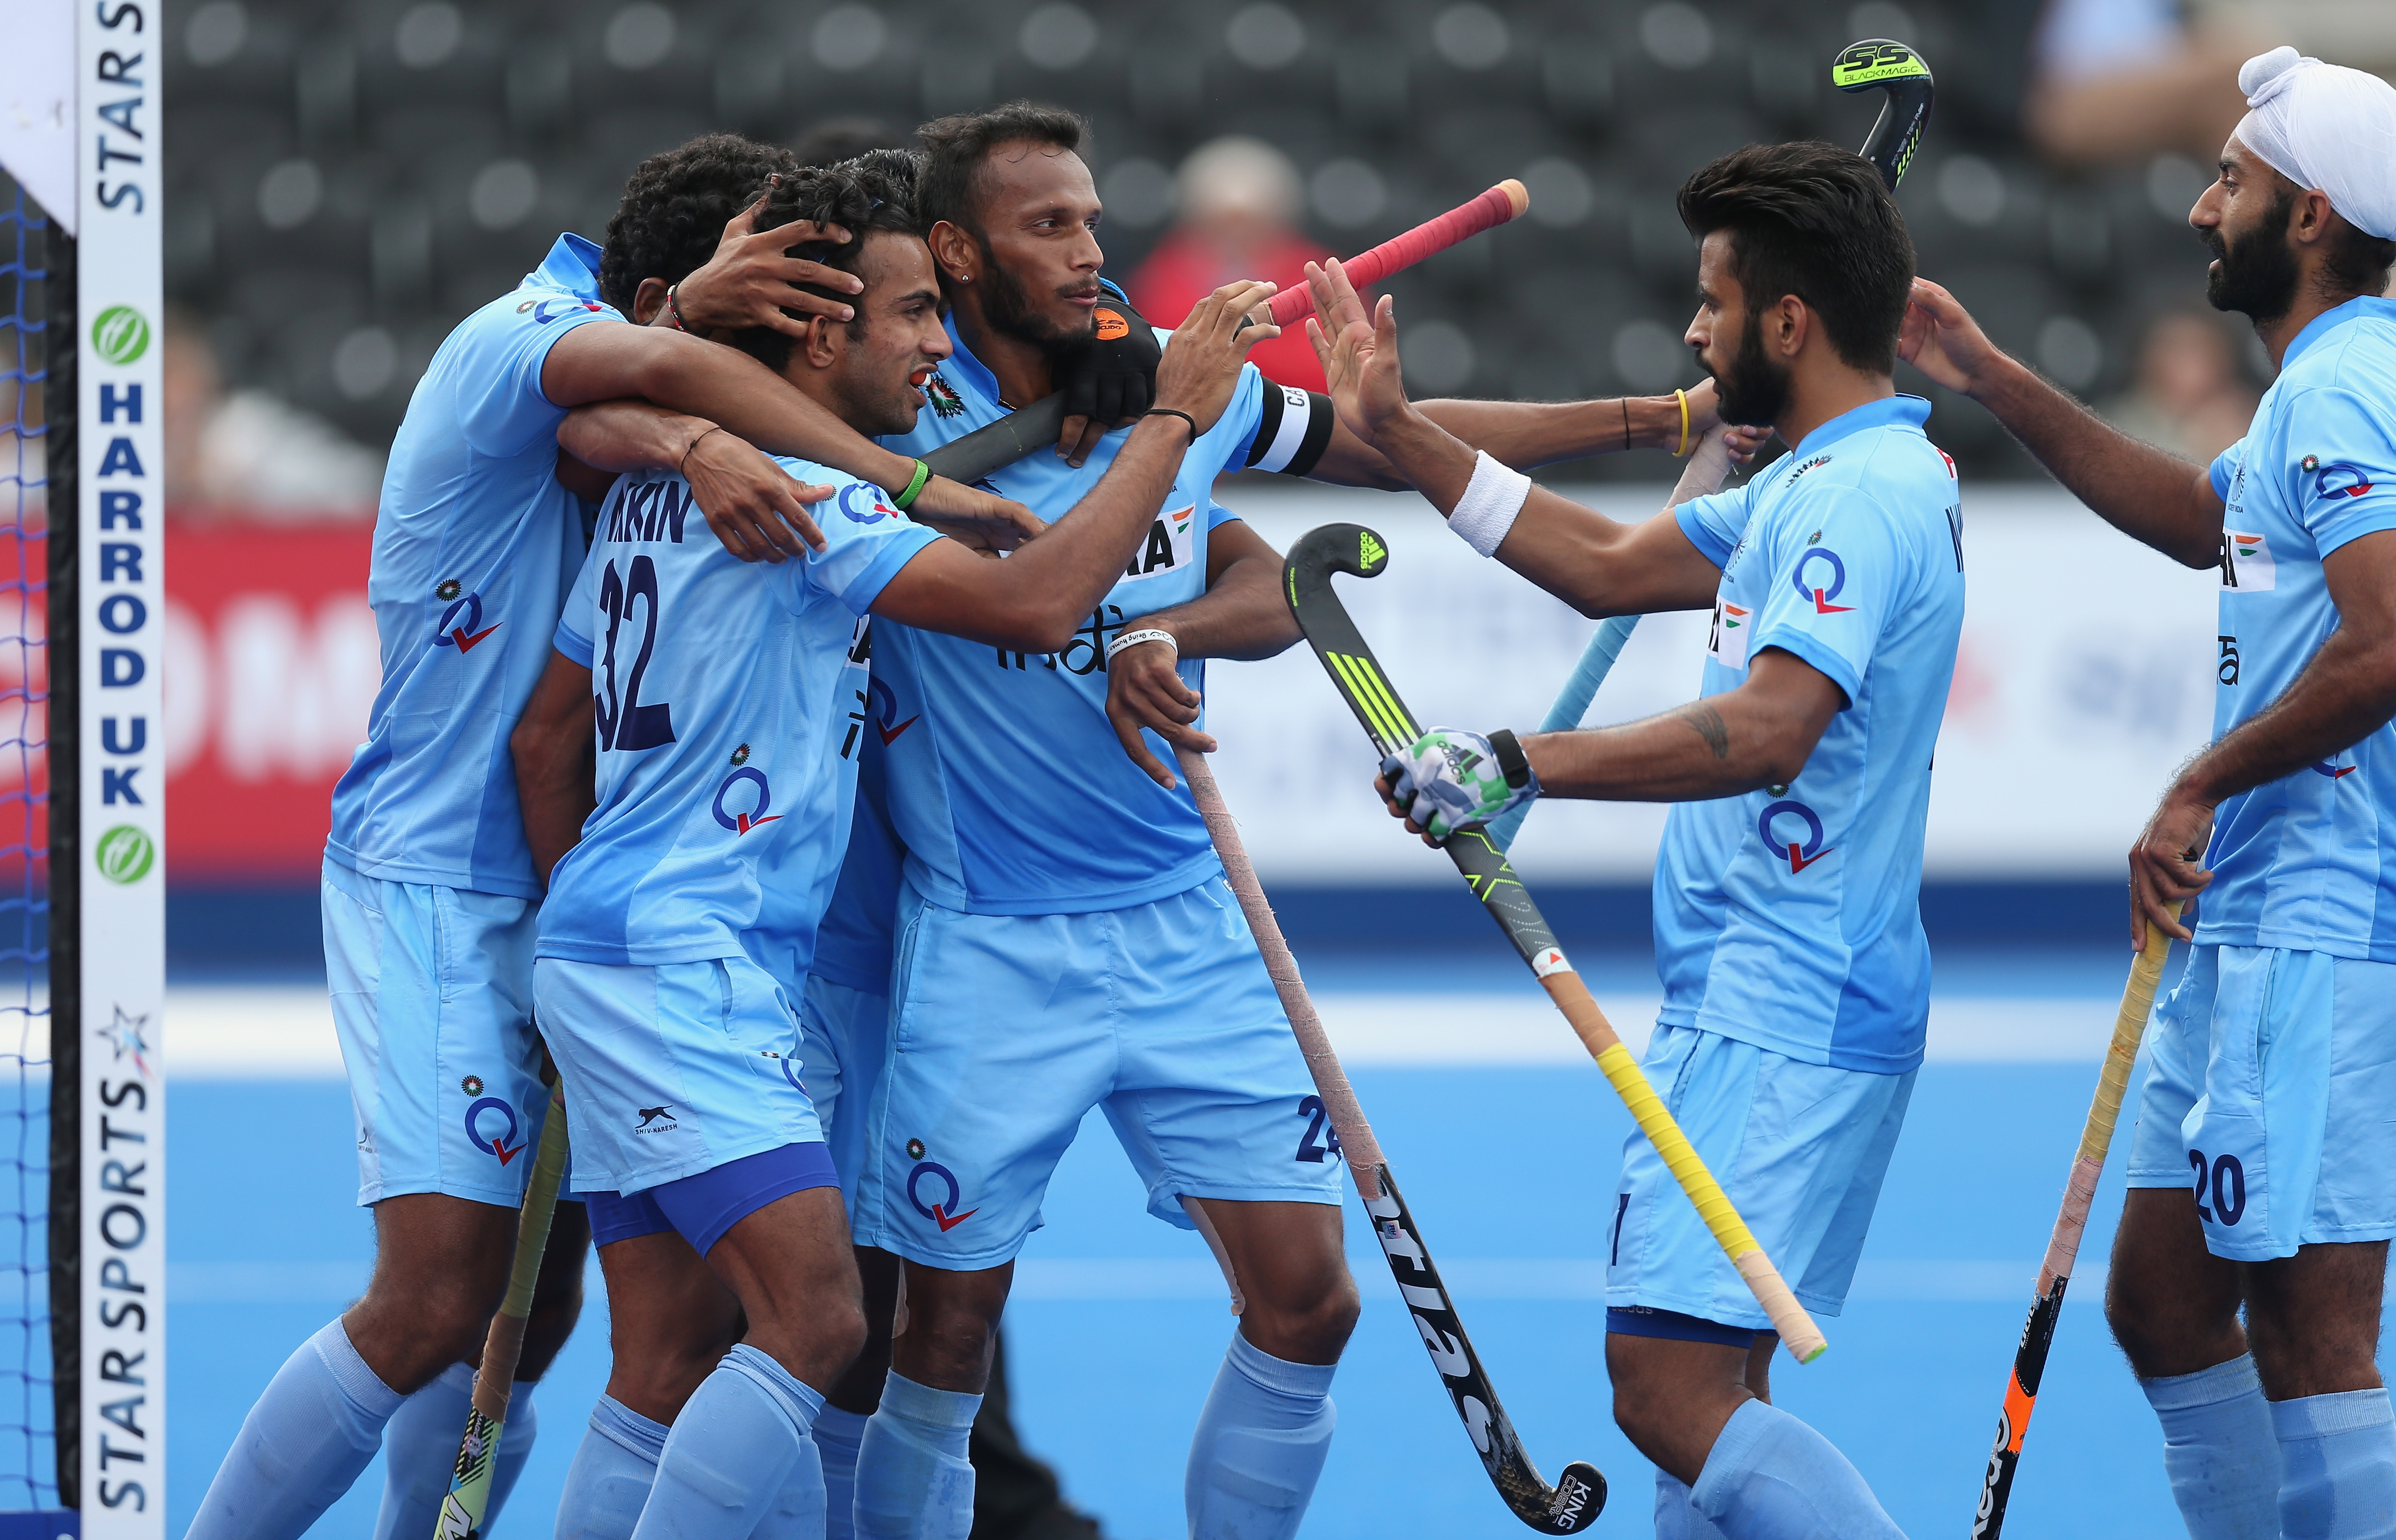 Hockey India names 48 players for national camp ahead of FIH Champions Trophy